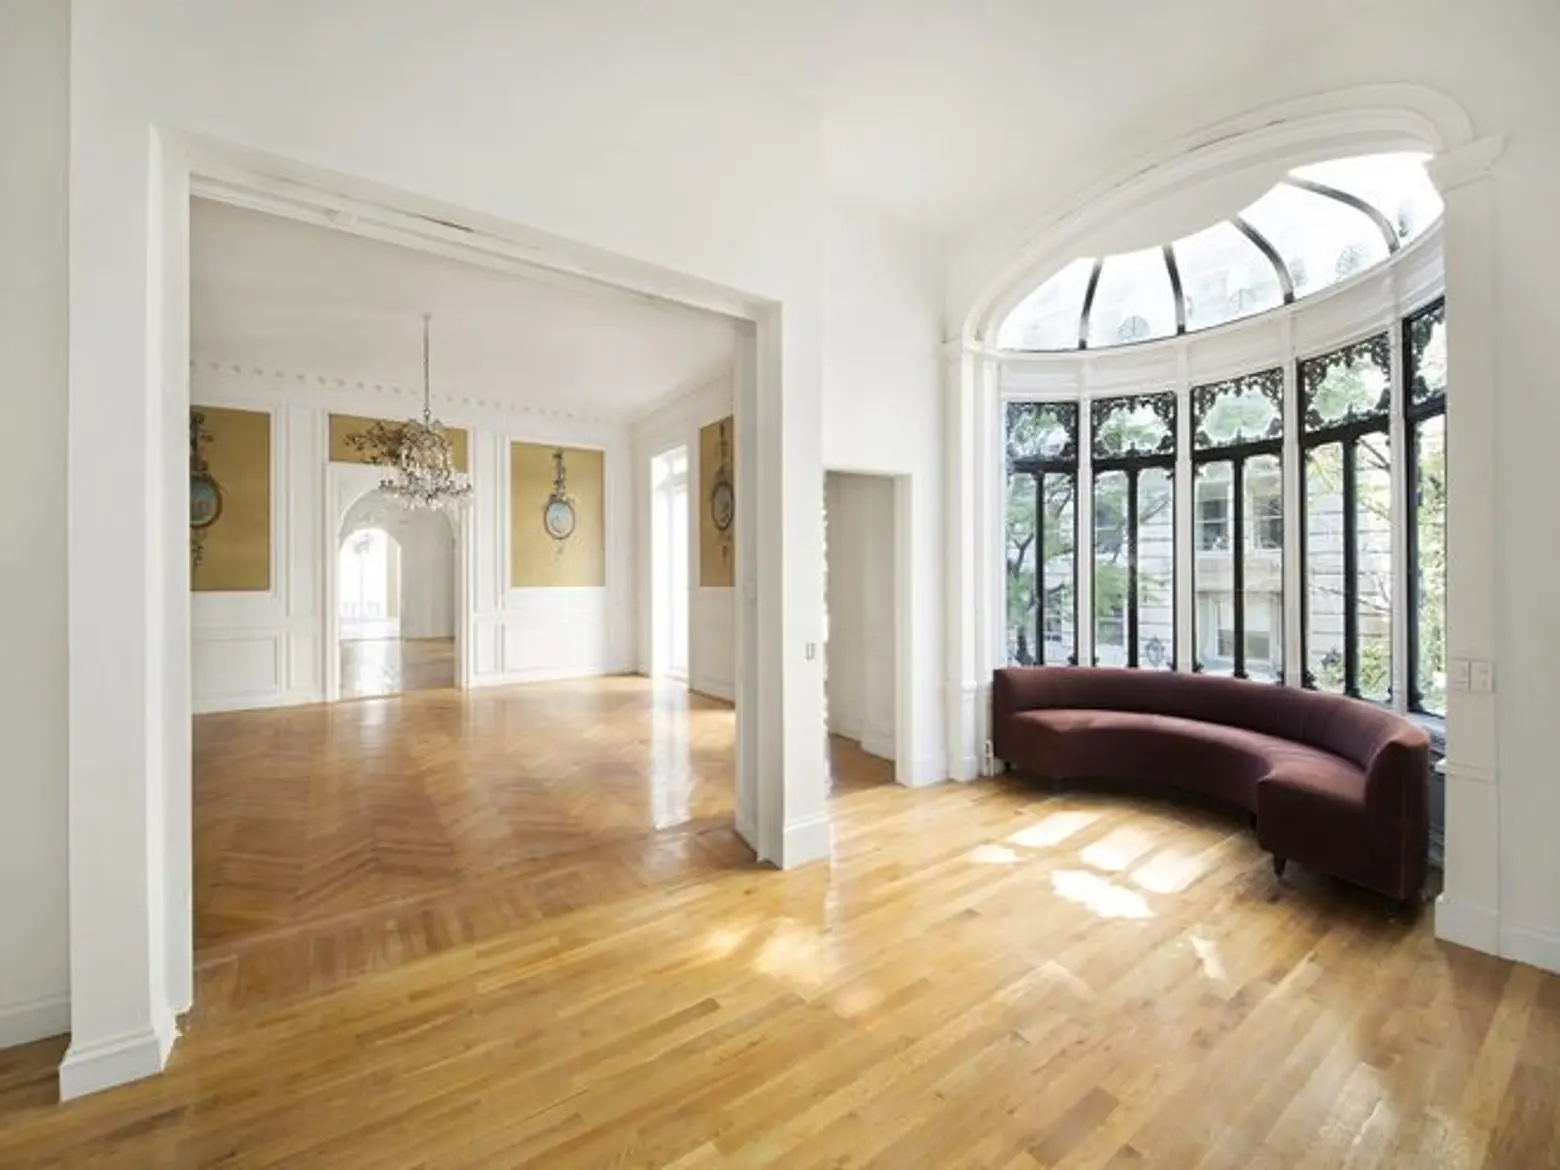 New Photos Inside Billionaire Carlos Slim’s UES Mansion Asking a Record $80 Million